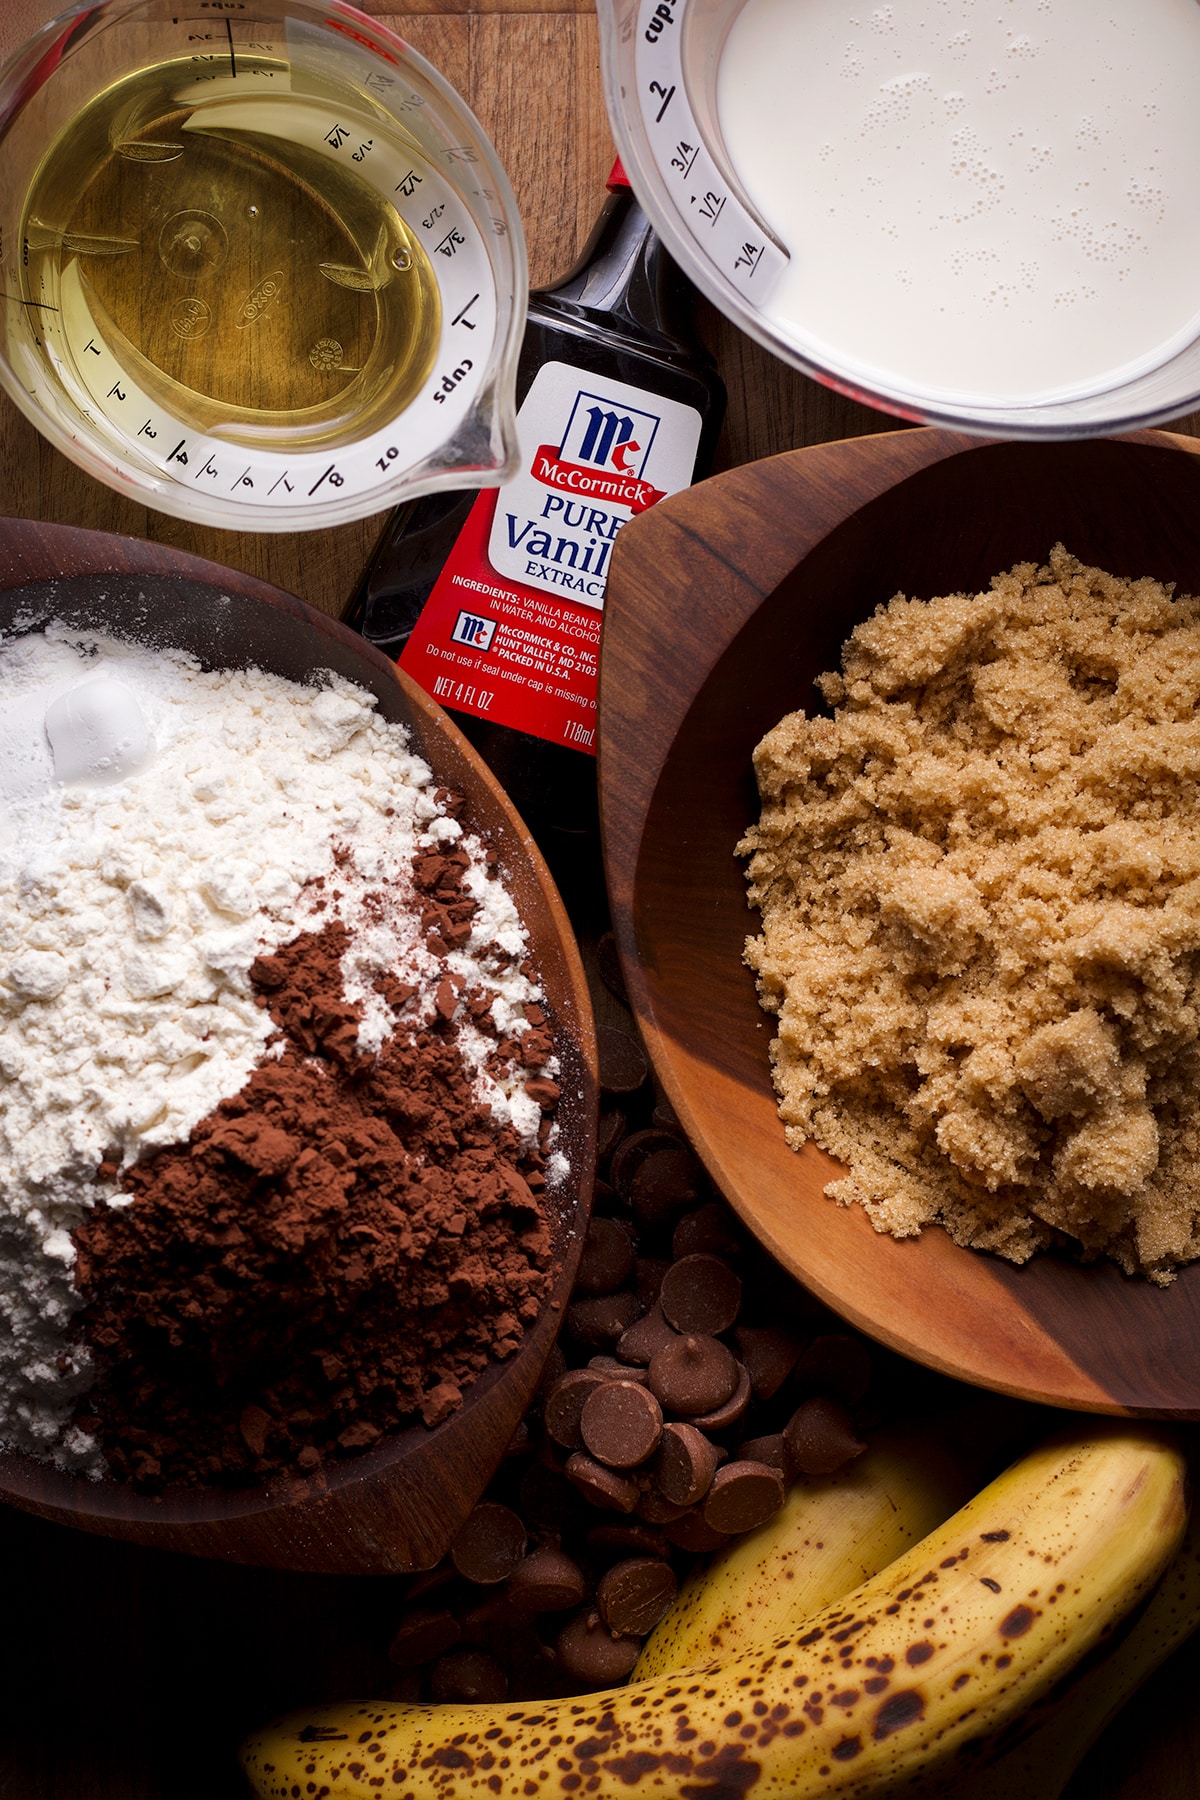 All the ingredients needed to make vegan chocolate banana muffins set out on a wood cutting board.